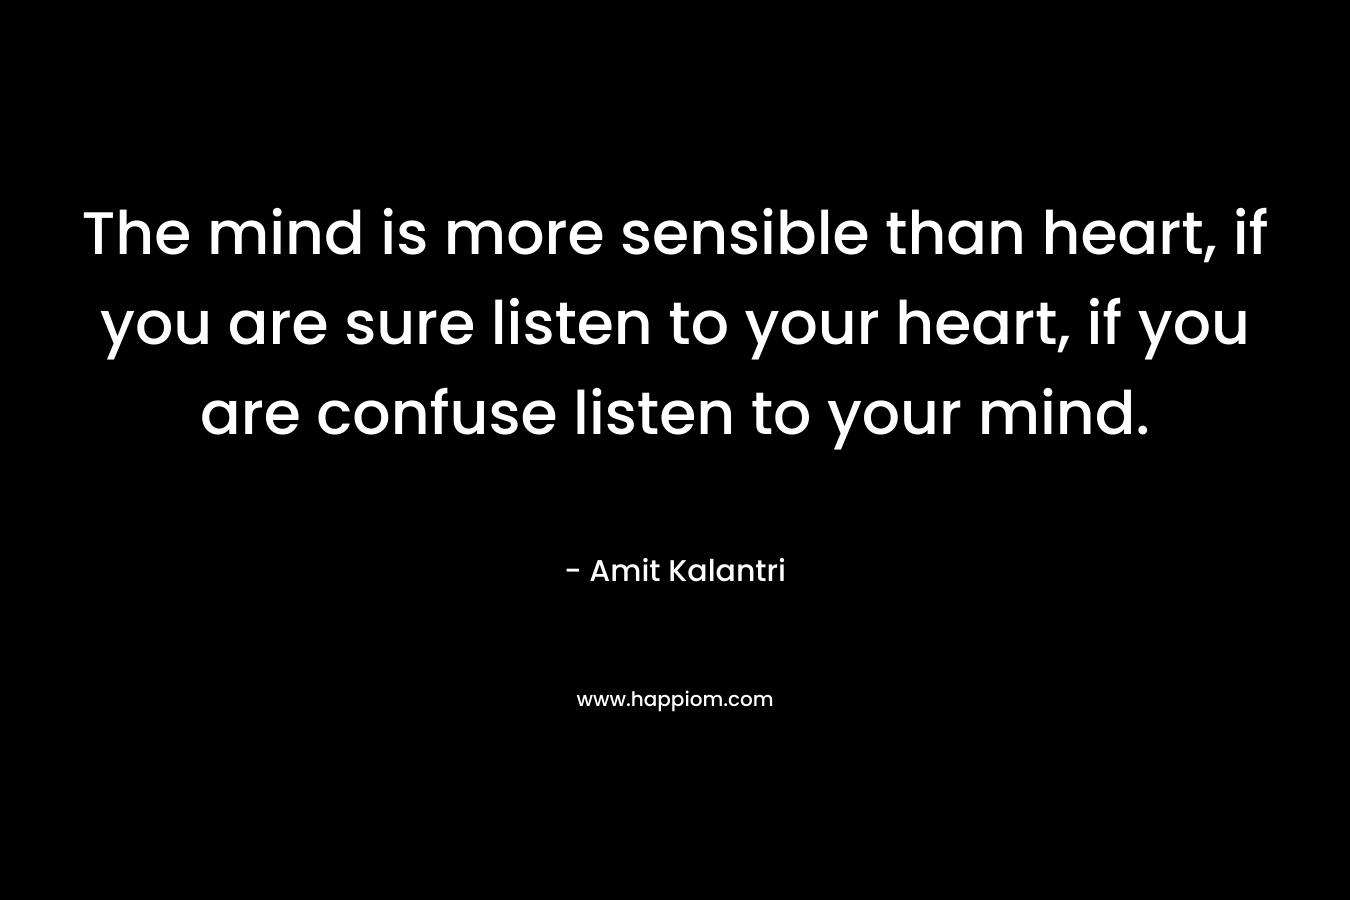 The mind is more sensible than heart, if you are sure listen to your heart, if you are confuse listen to your mind.